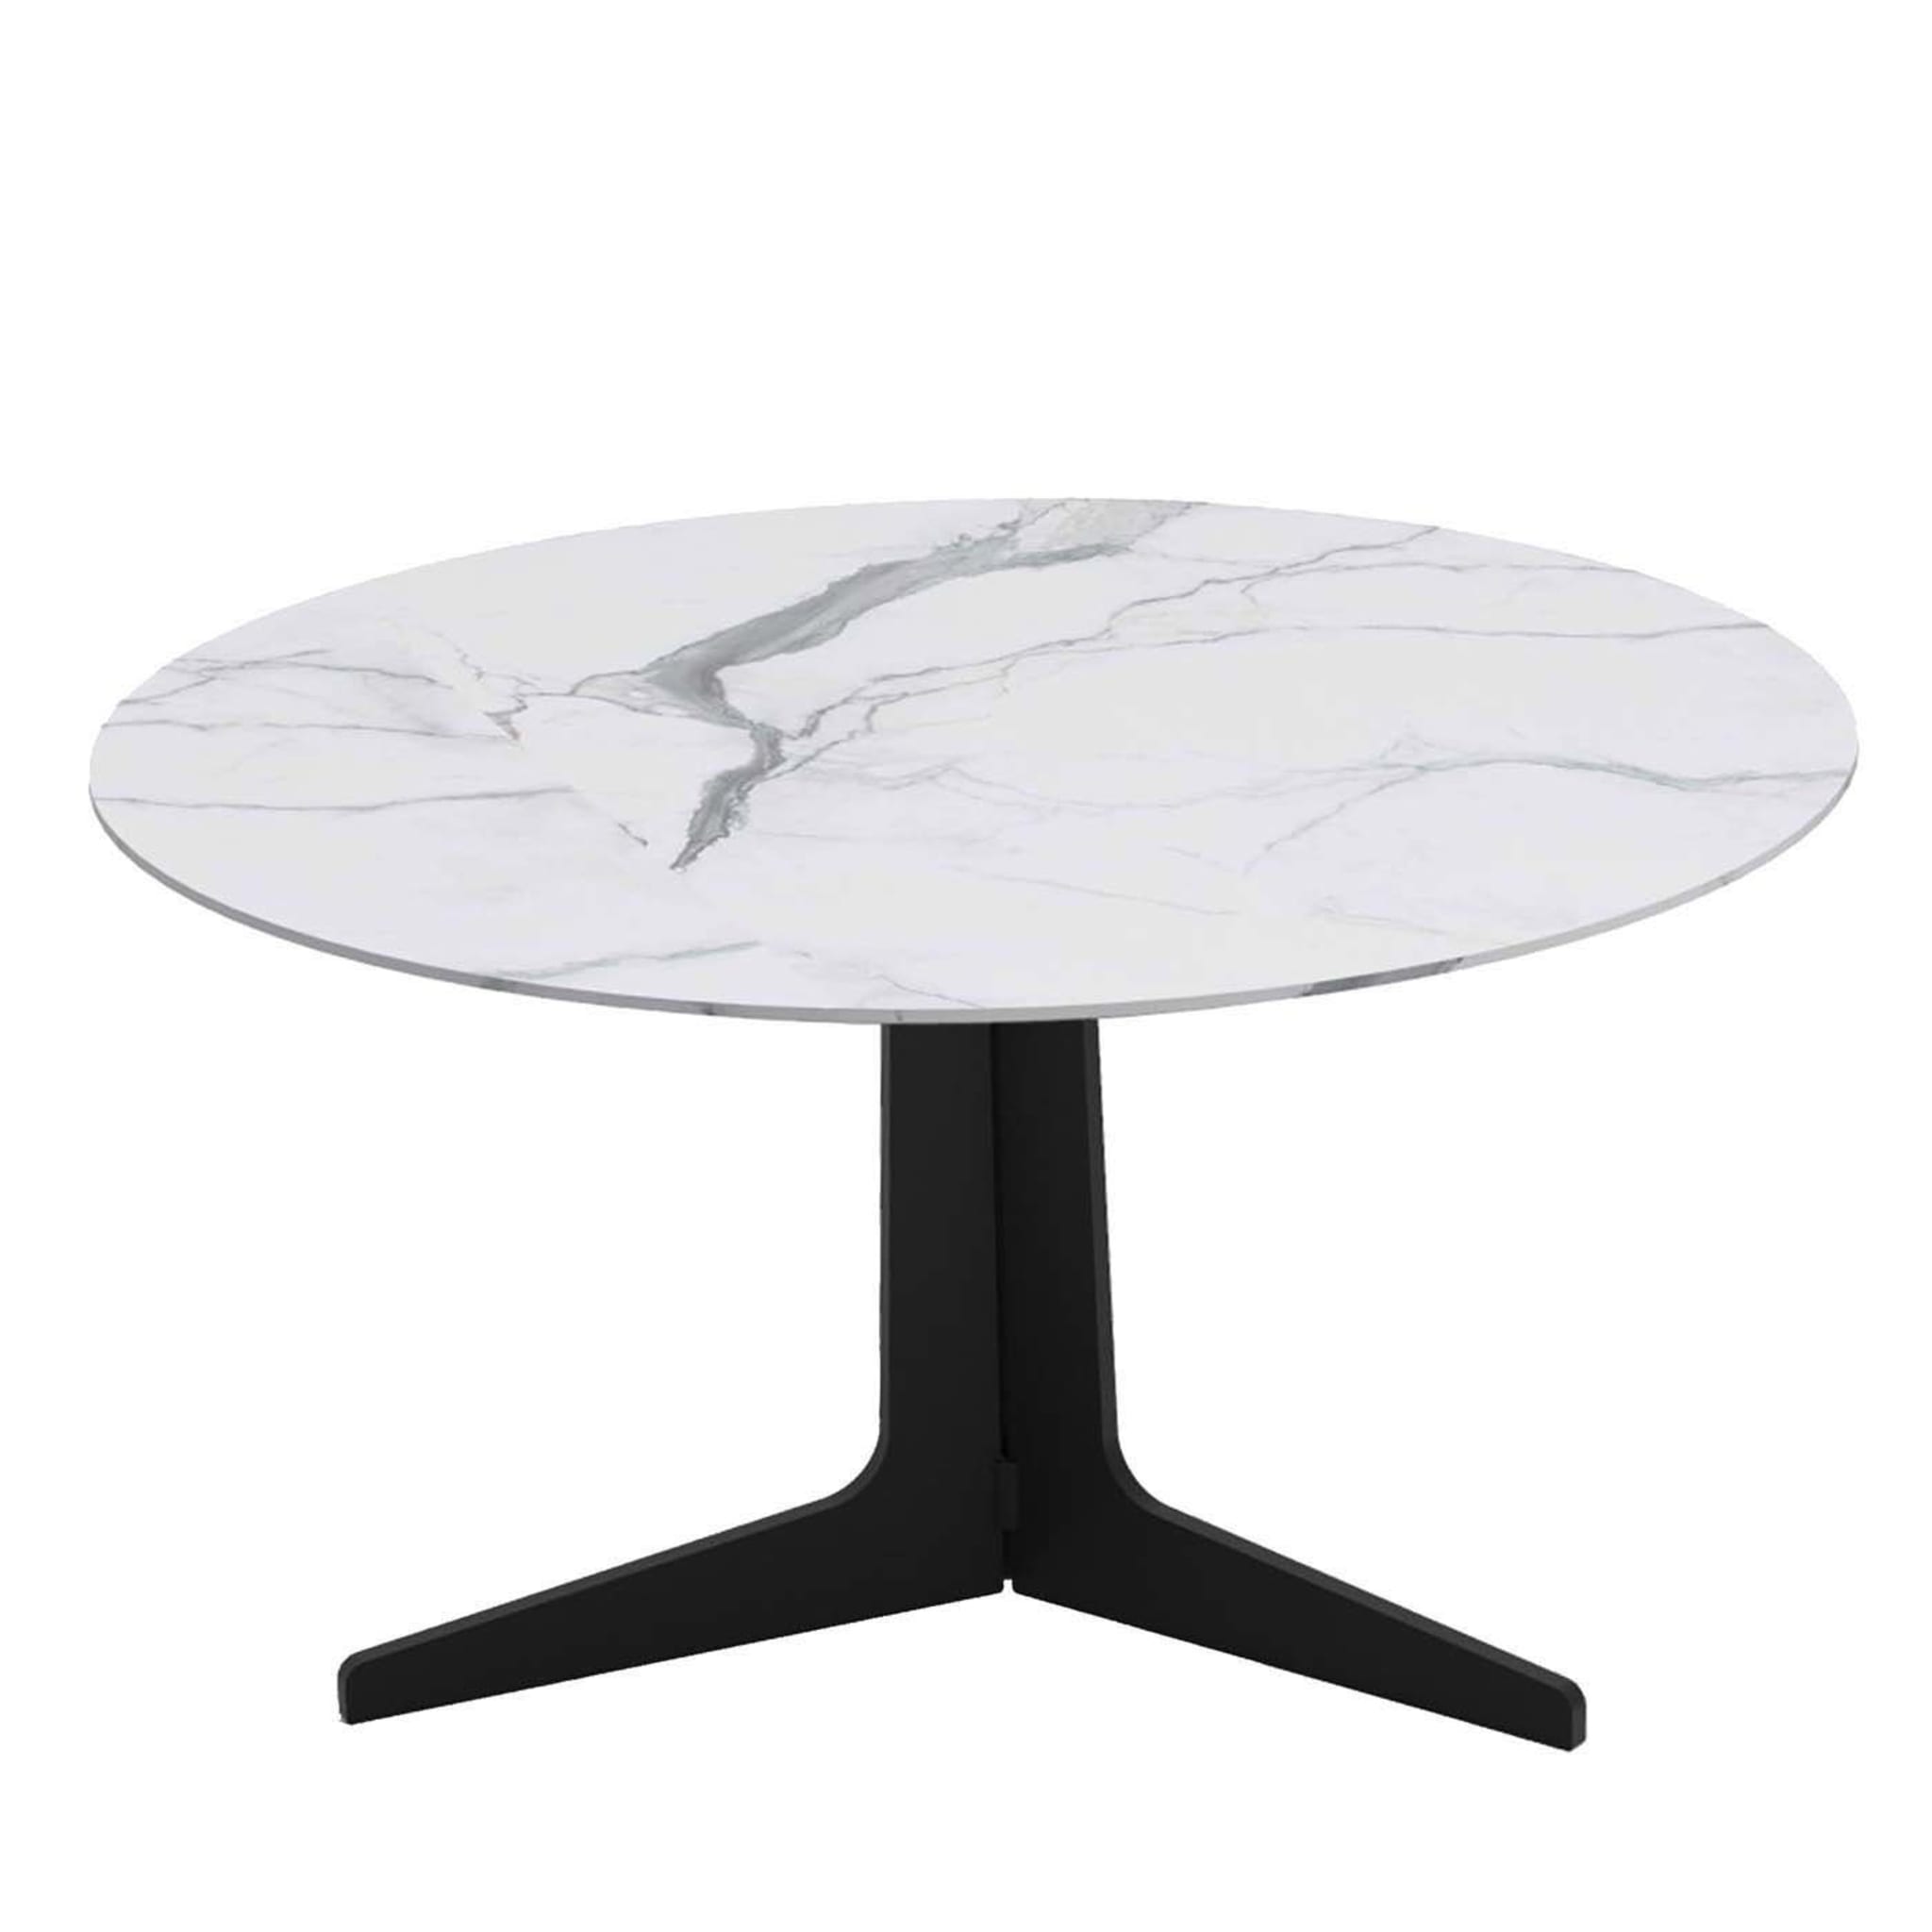 Blake Round Coffee Table with Calacatta Marble Top - Main view